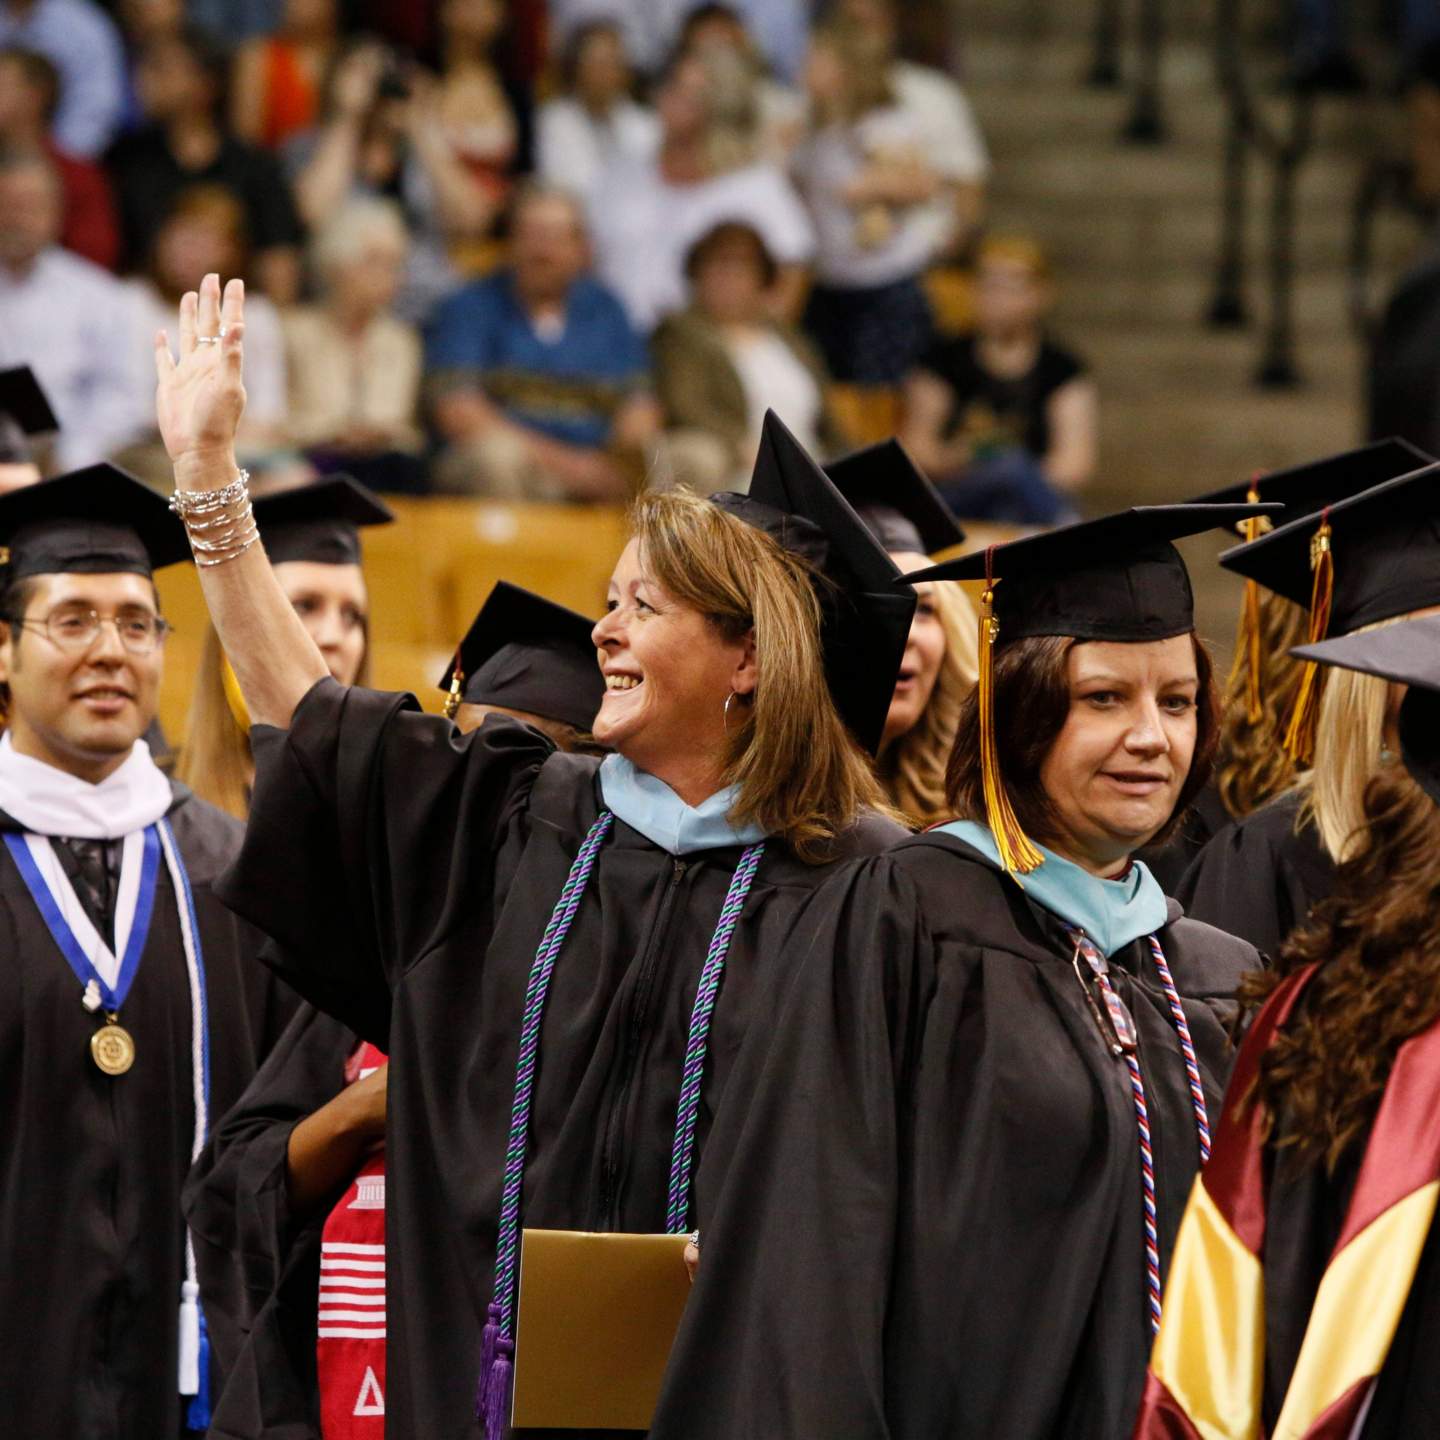 ae enthusiastic graduate waving to her guest during commencement ceremony